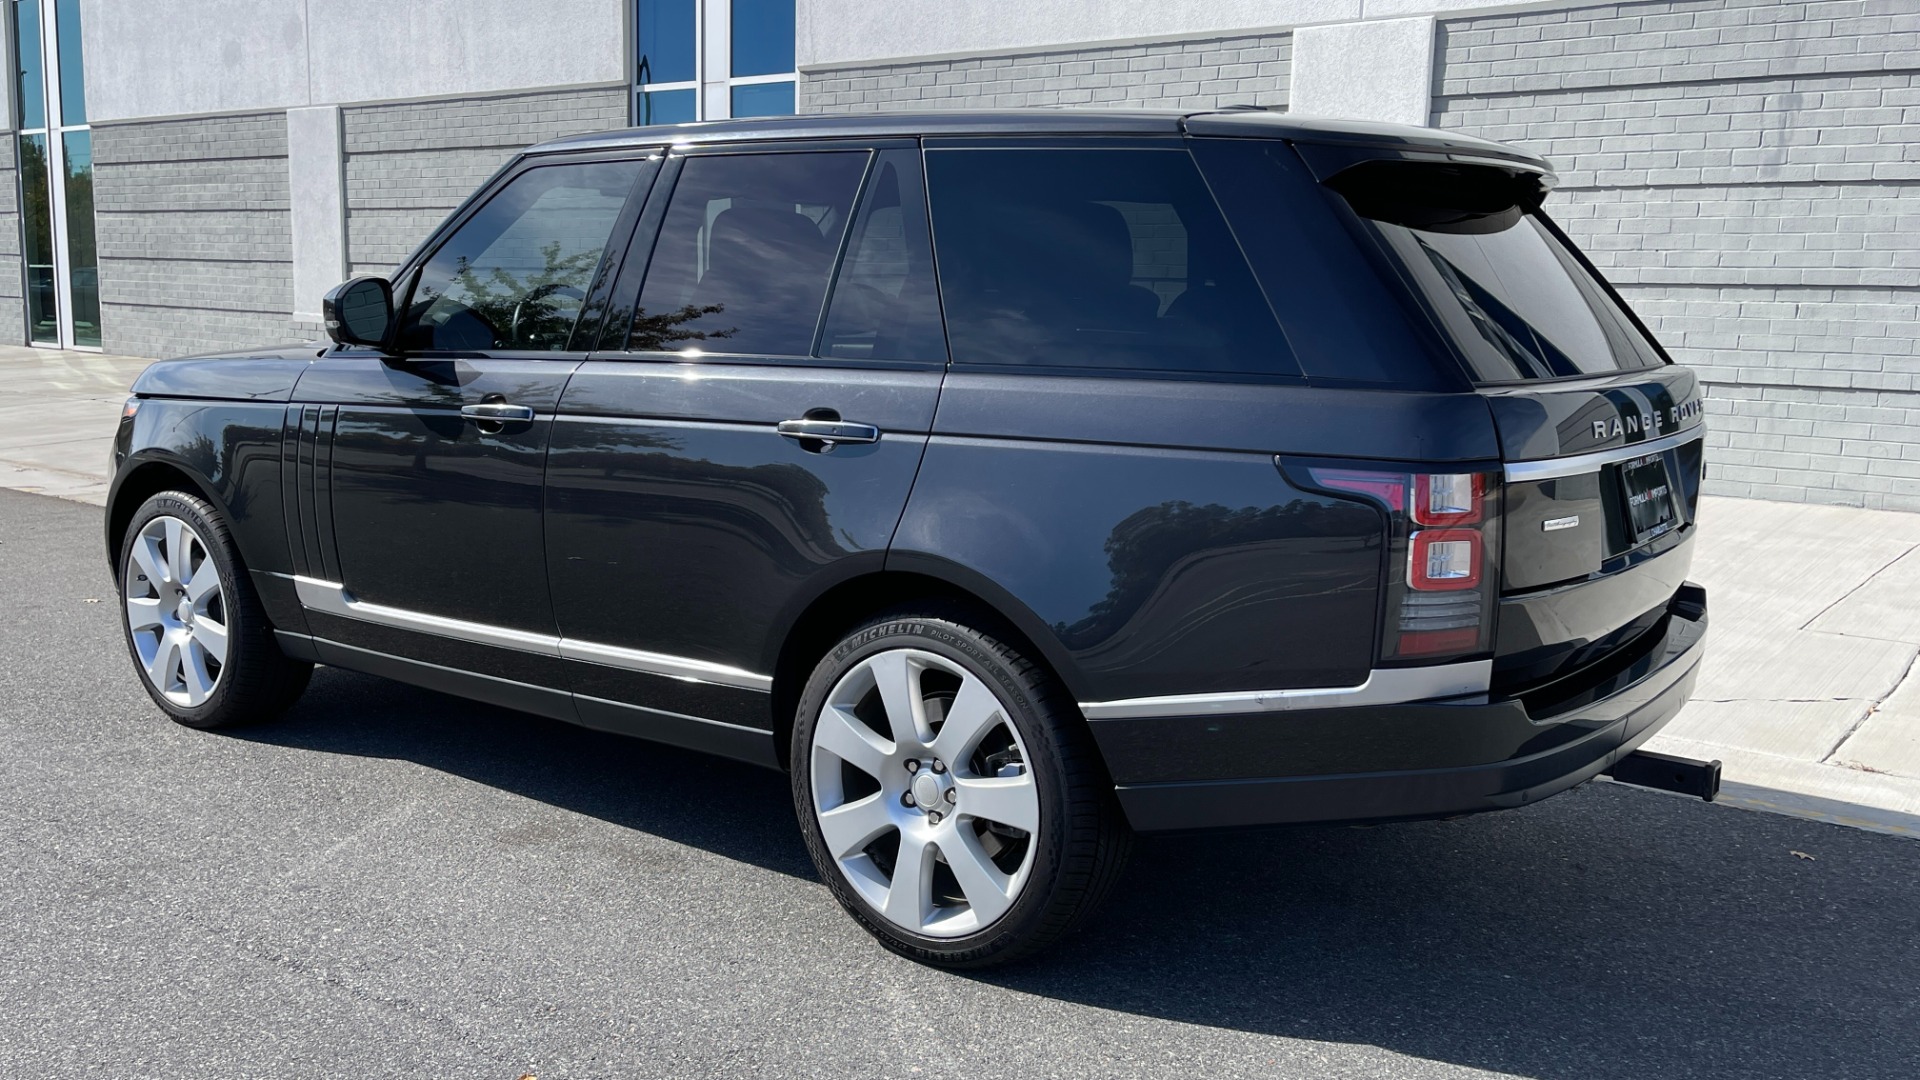 Used 2014 Land Rover Range Rover Supercharged Autobiography / 22IN WHEELS / PREMIUM PAINT / MASSAGE for sale $37,999 at Formula Imports in Charlotte NC 28227 2